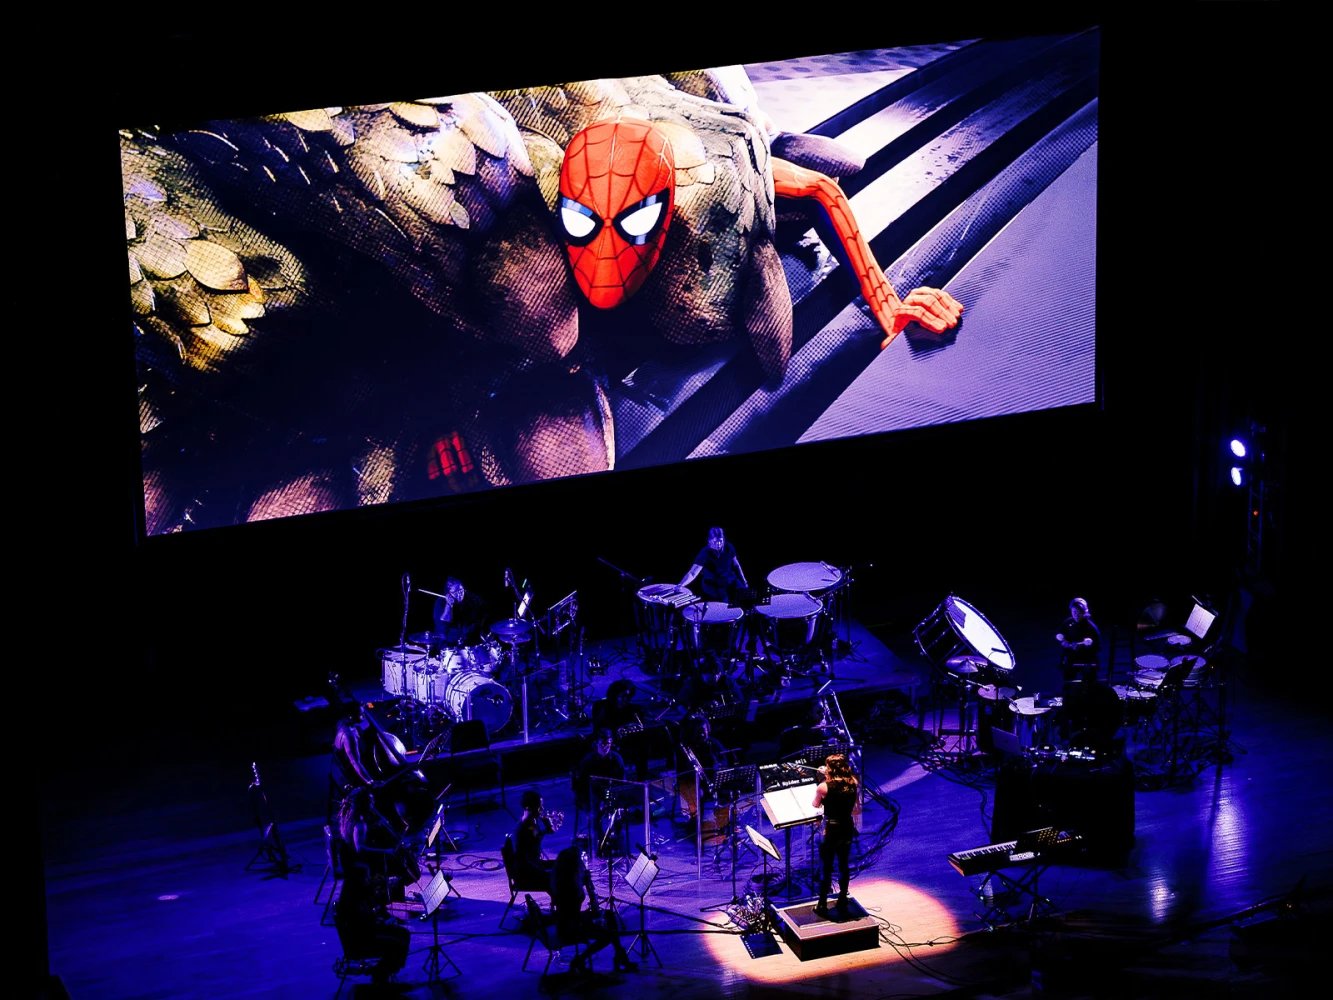 Spider-Man: Into The Spider-Verse Live In Concert